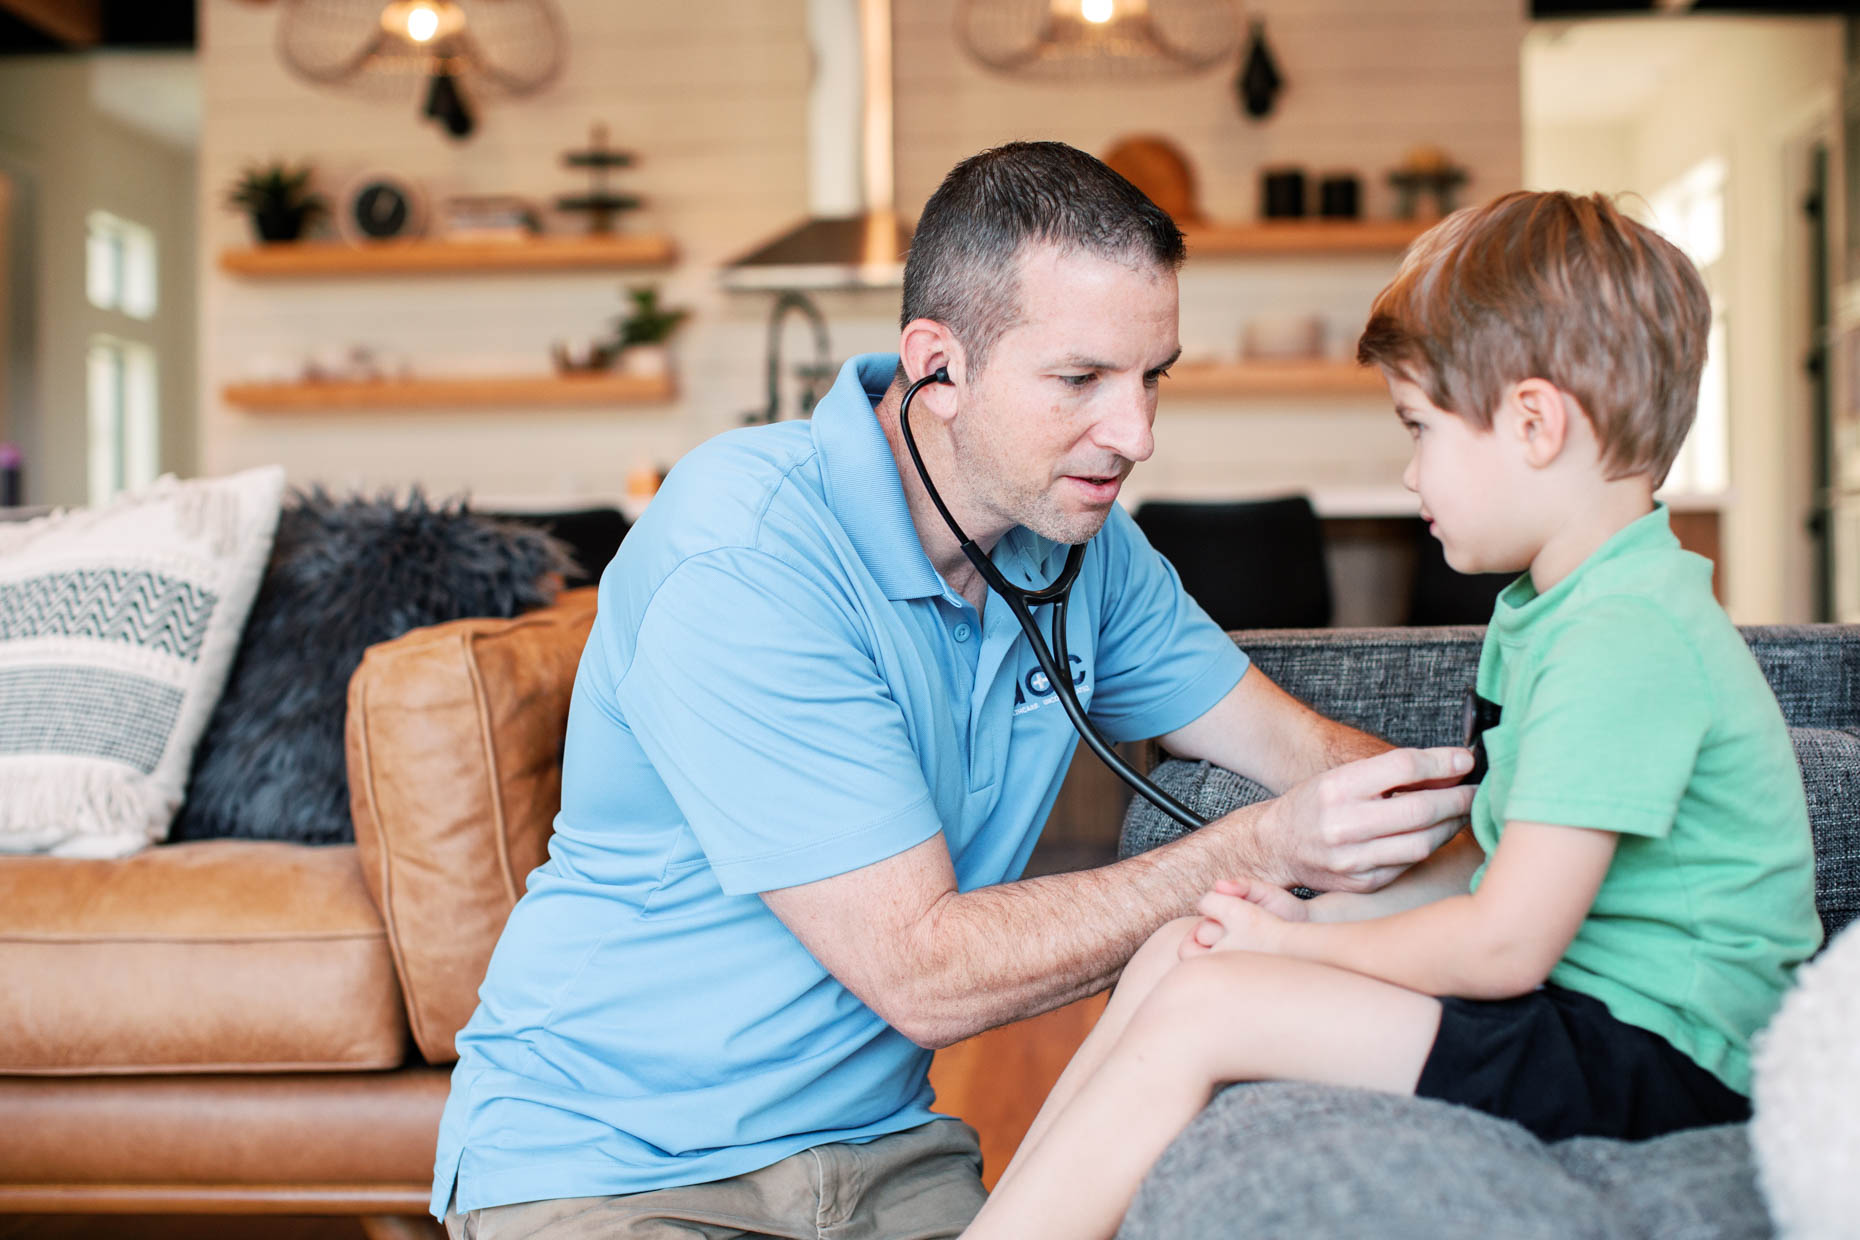 at home healthcare provider examining a little boy in home setting